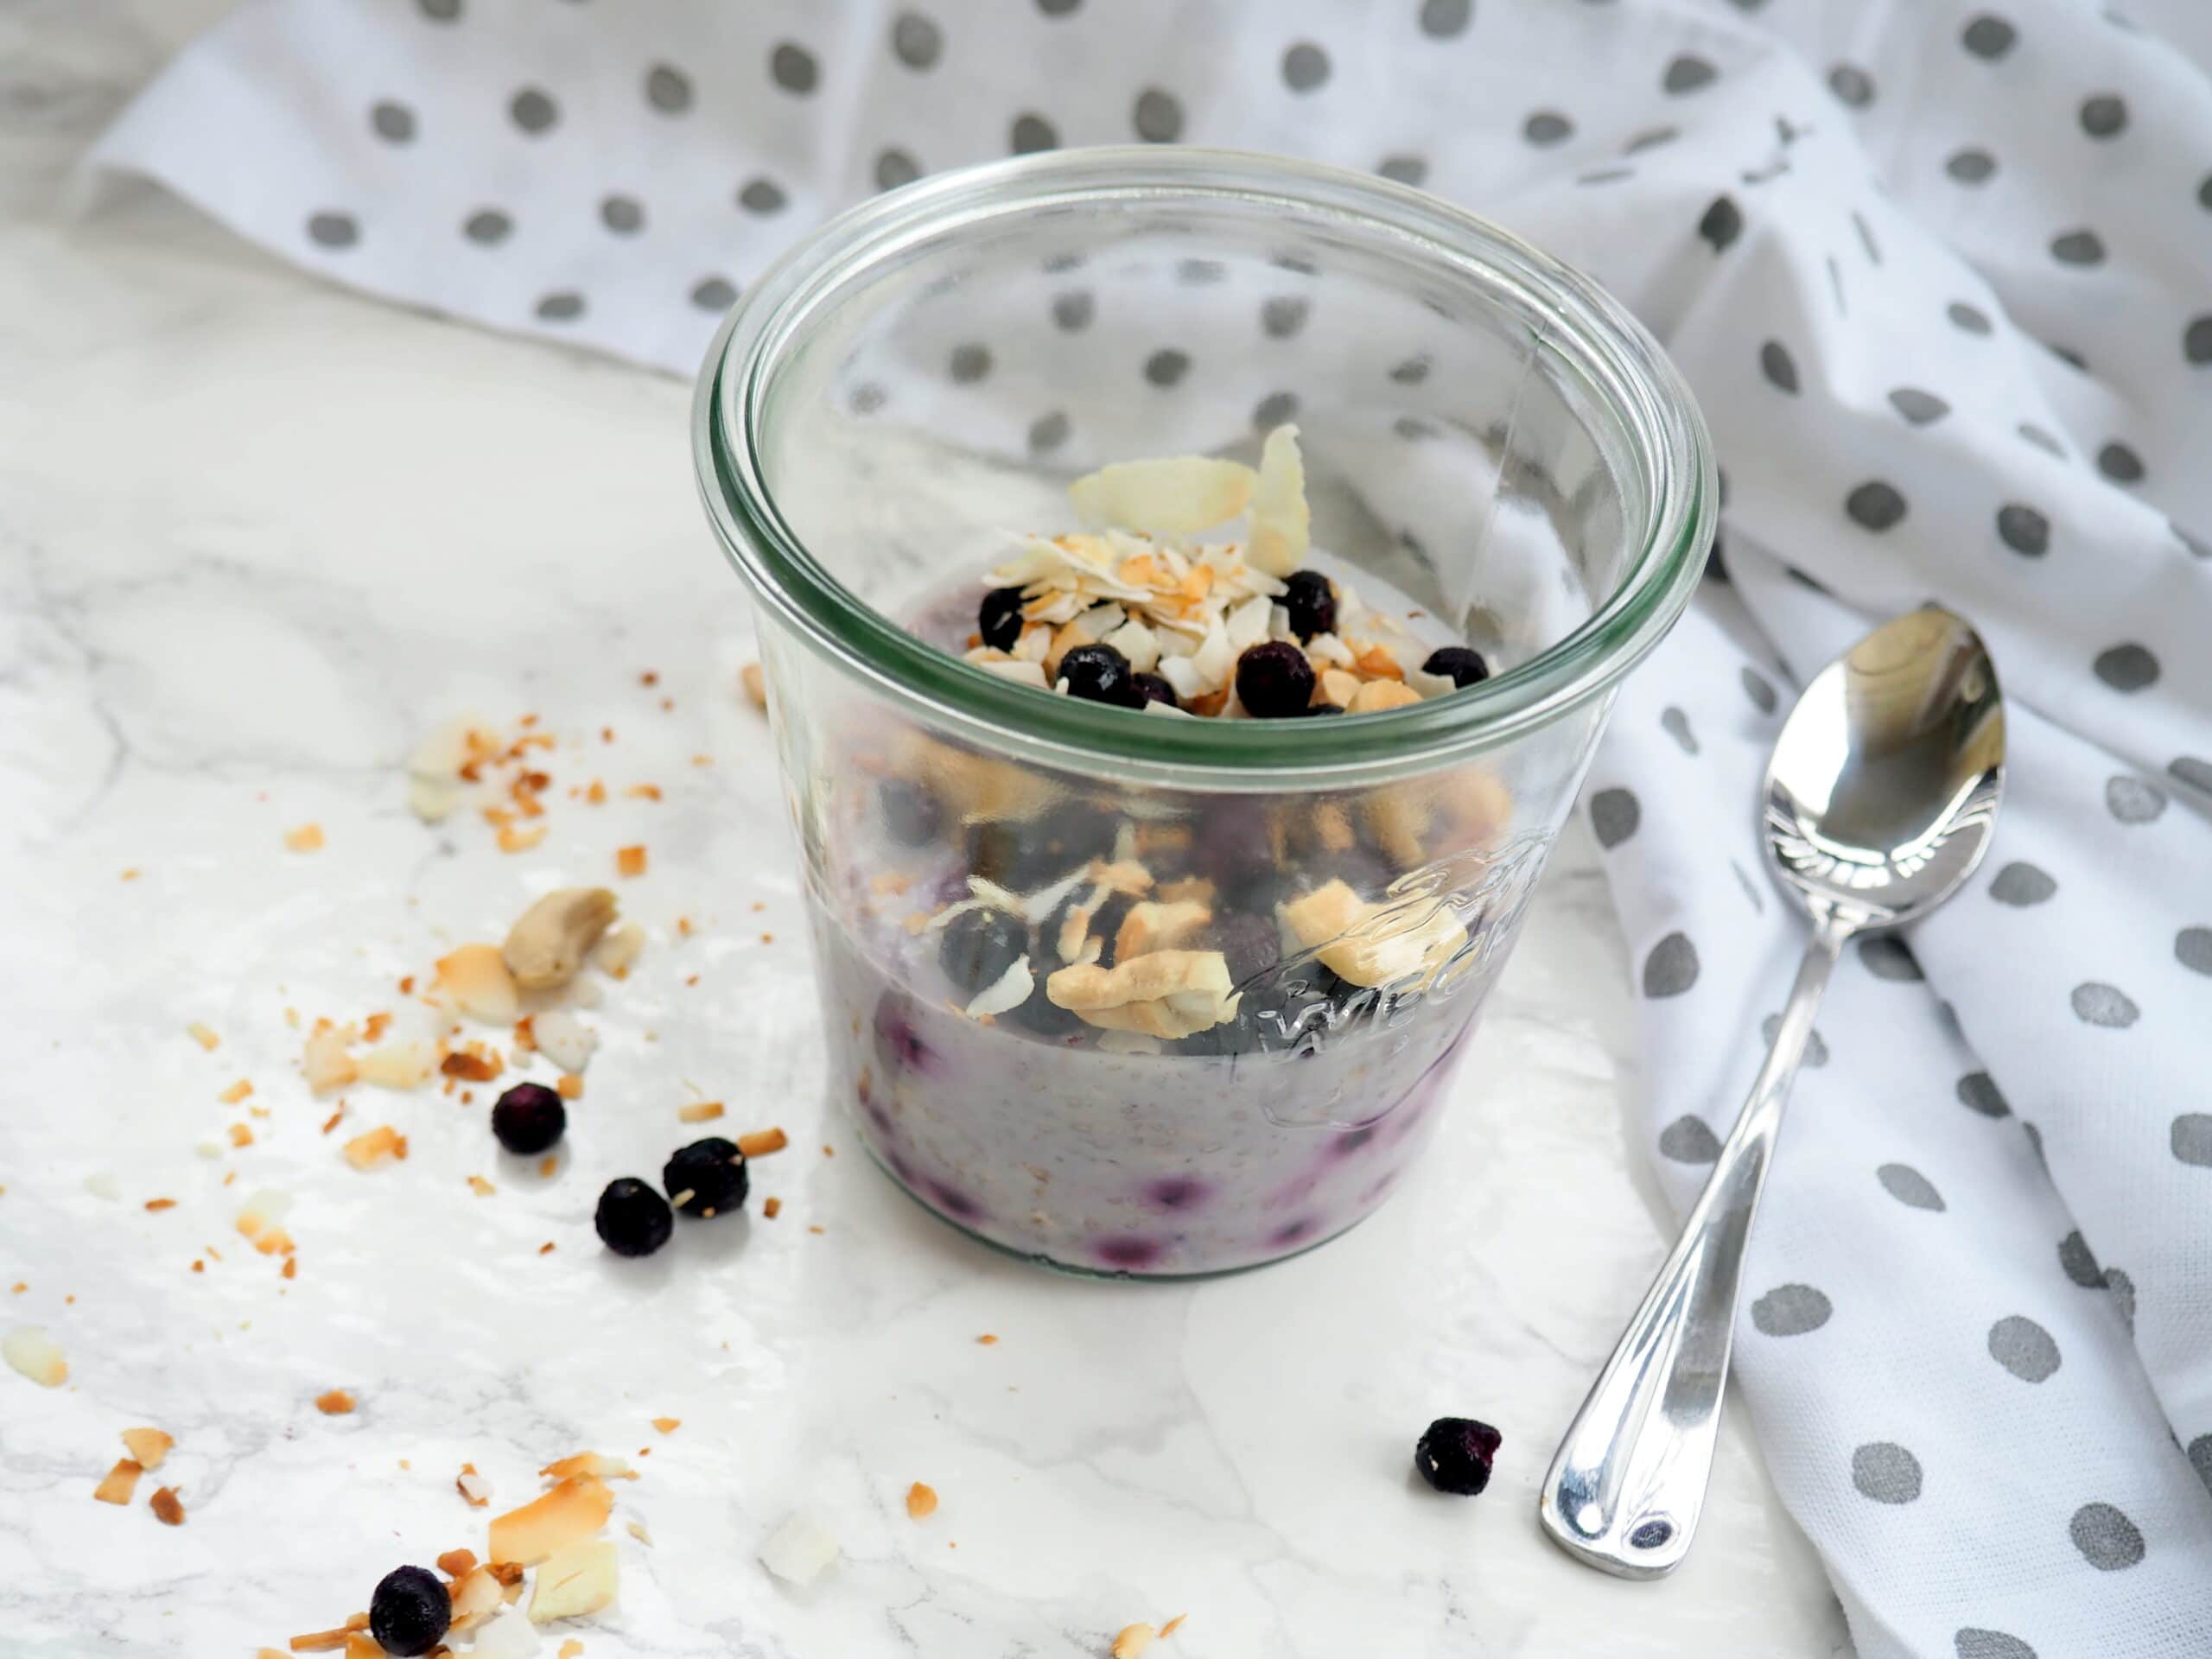 Stir together the ingredients for this wild blueberry overnight oatmeal and you will be ready to start your day off right in the morning. Enjoy at home or bring along to work or school.